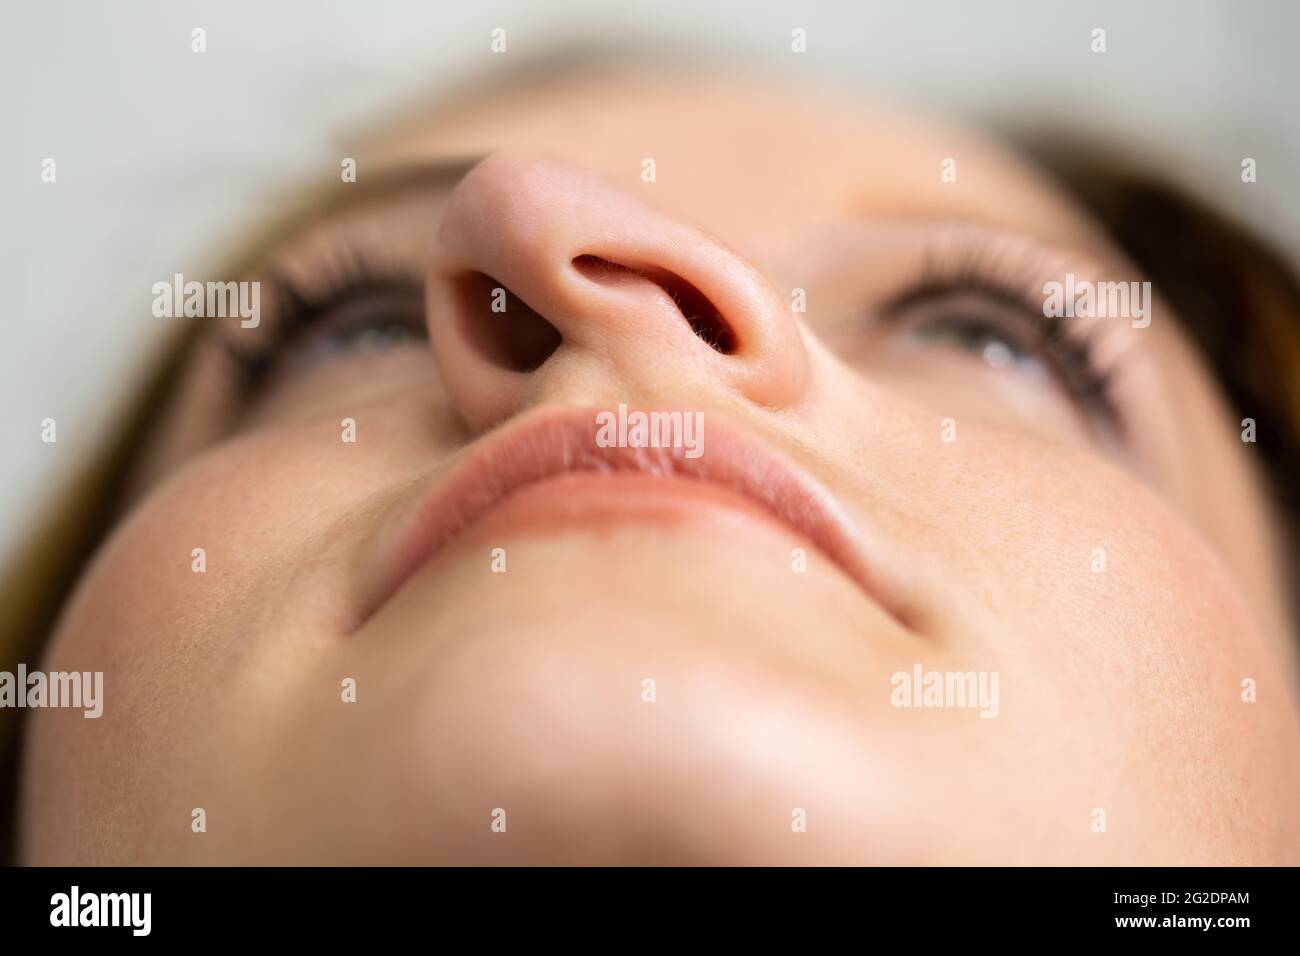 Young Woman Before Aesthetic Facelift. Rhinoplasty Nose Surgery Stock Photo